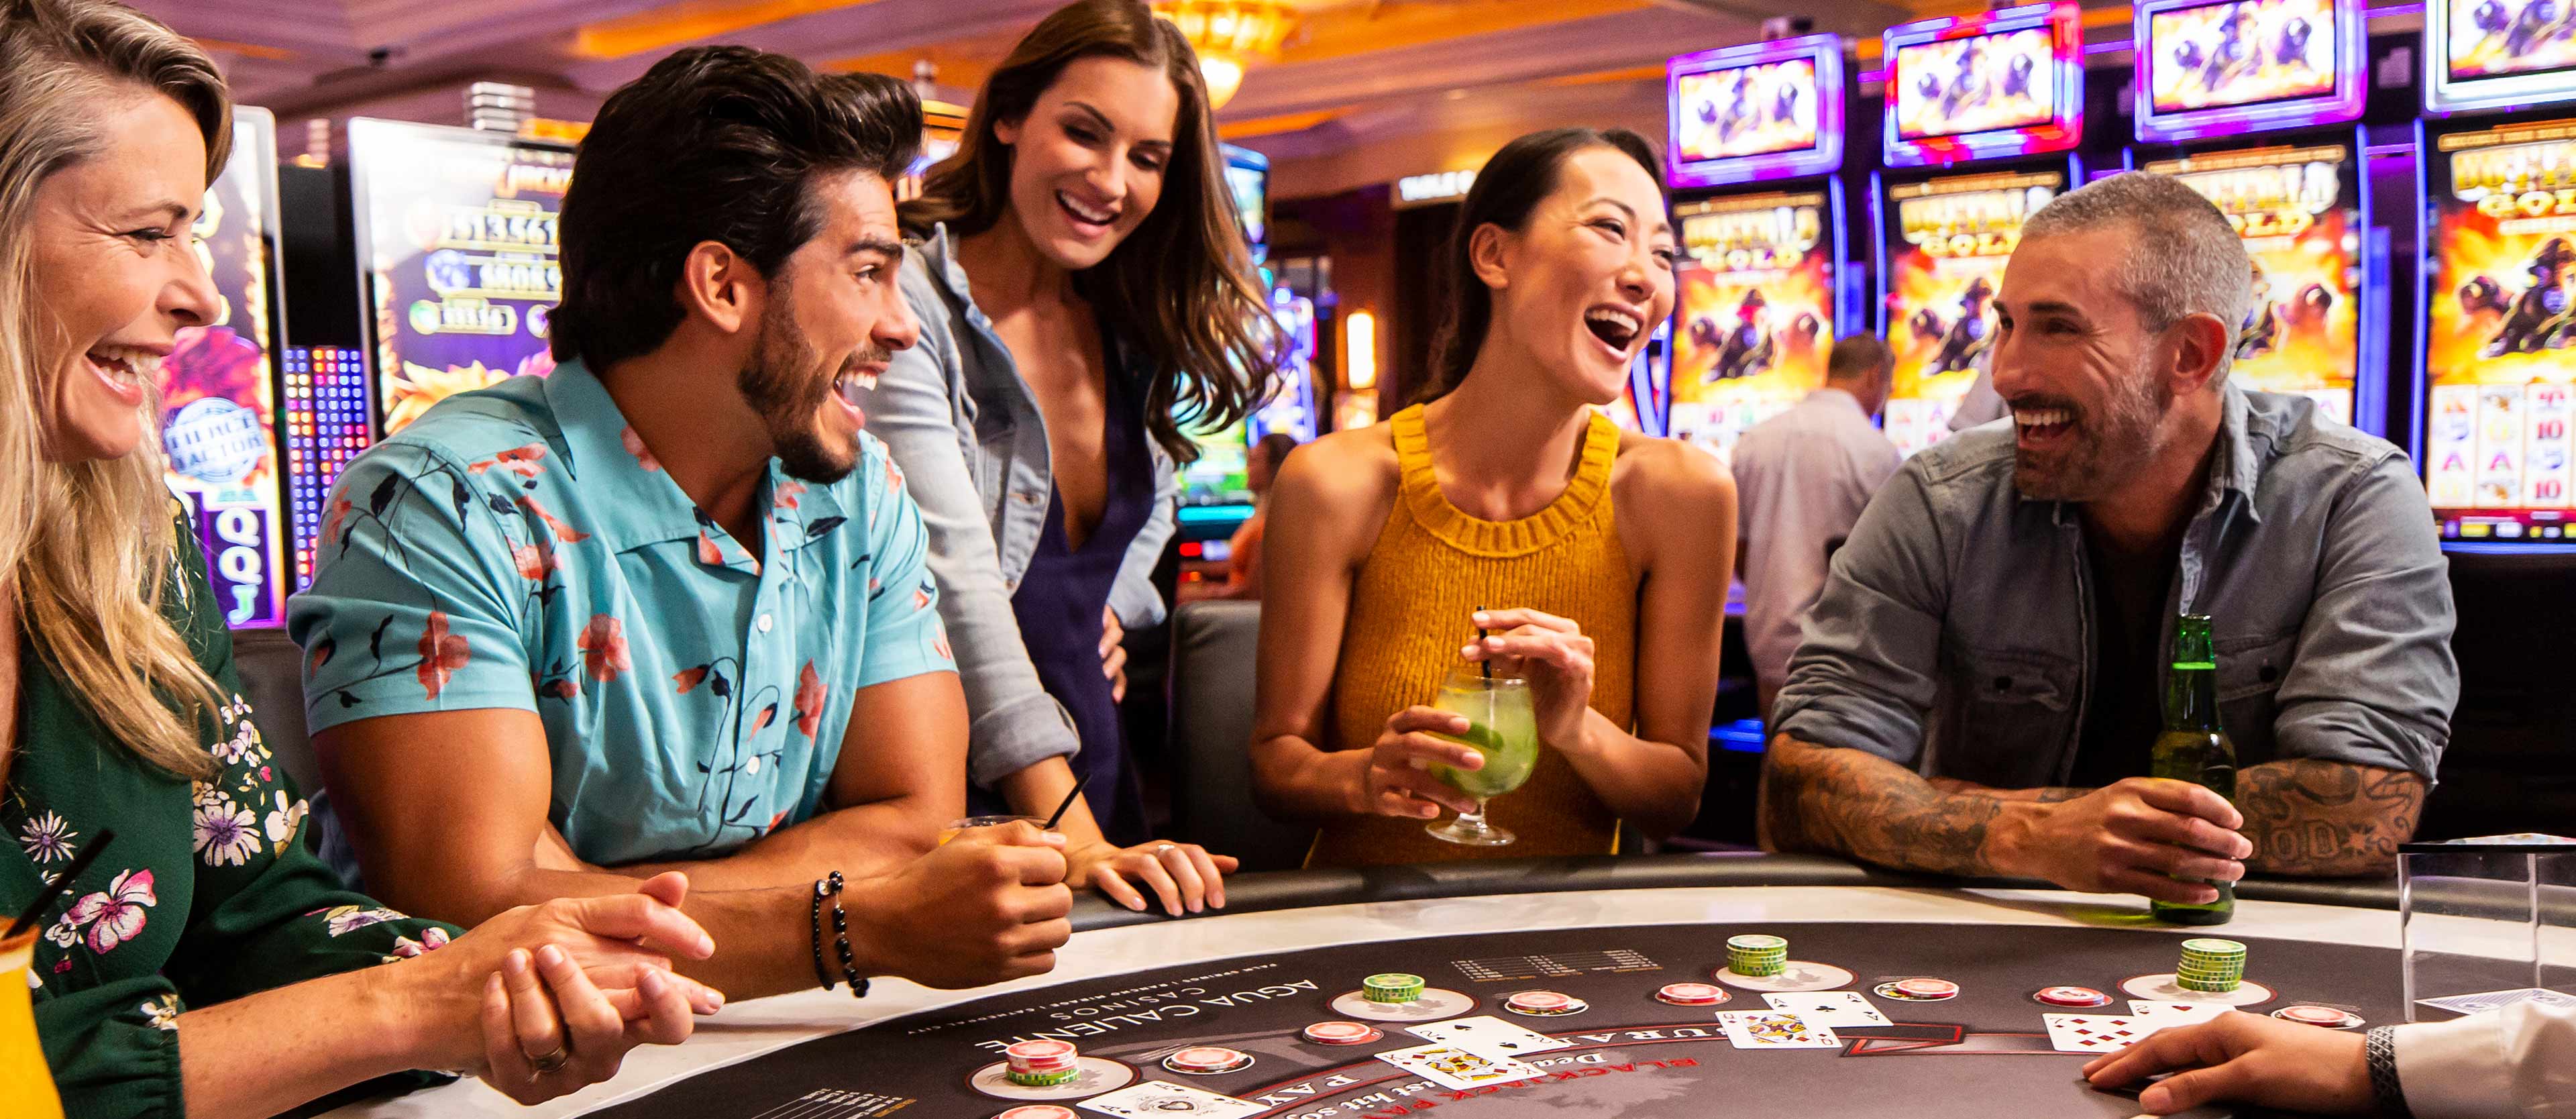 Super Easy Simple Ways The Pros Use To Promote Gaming casinos